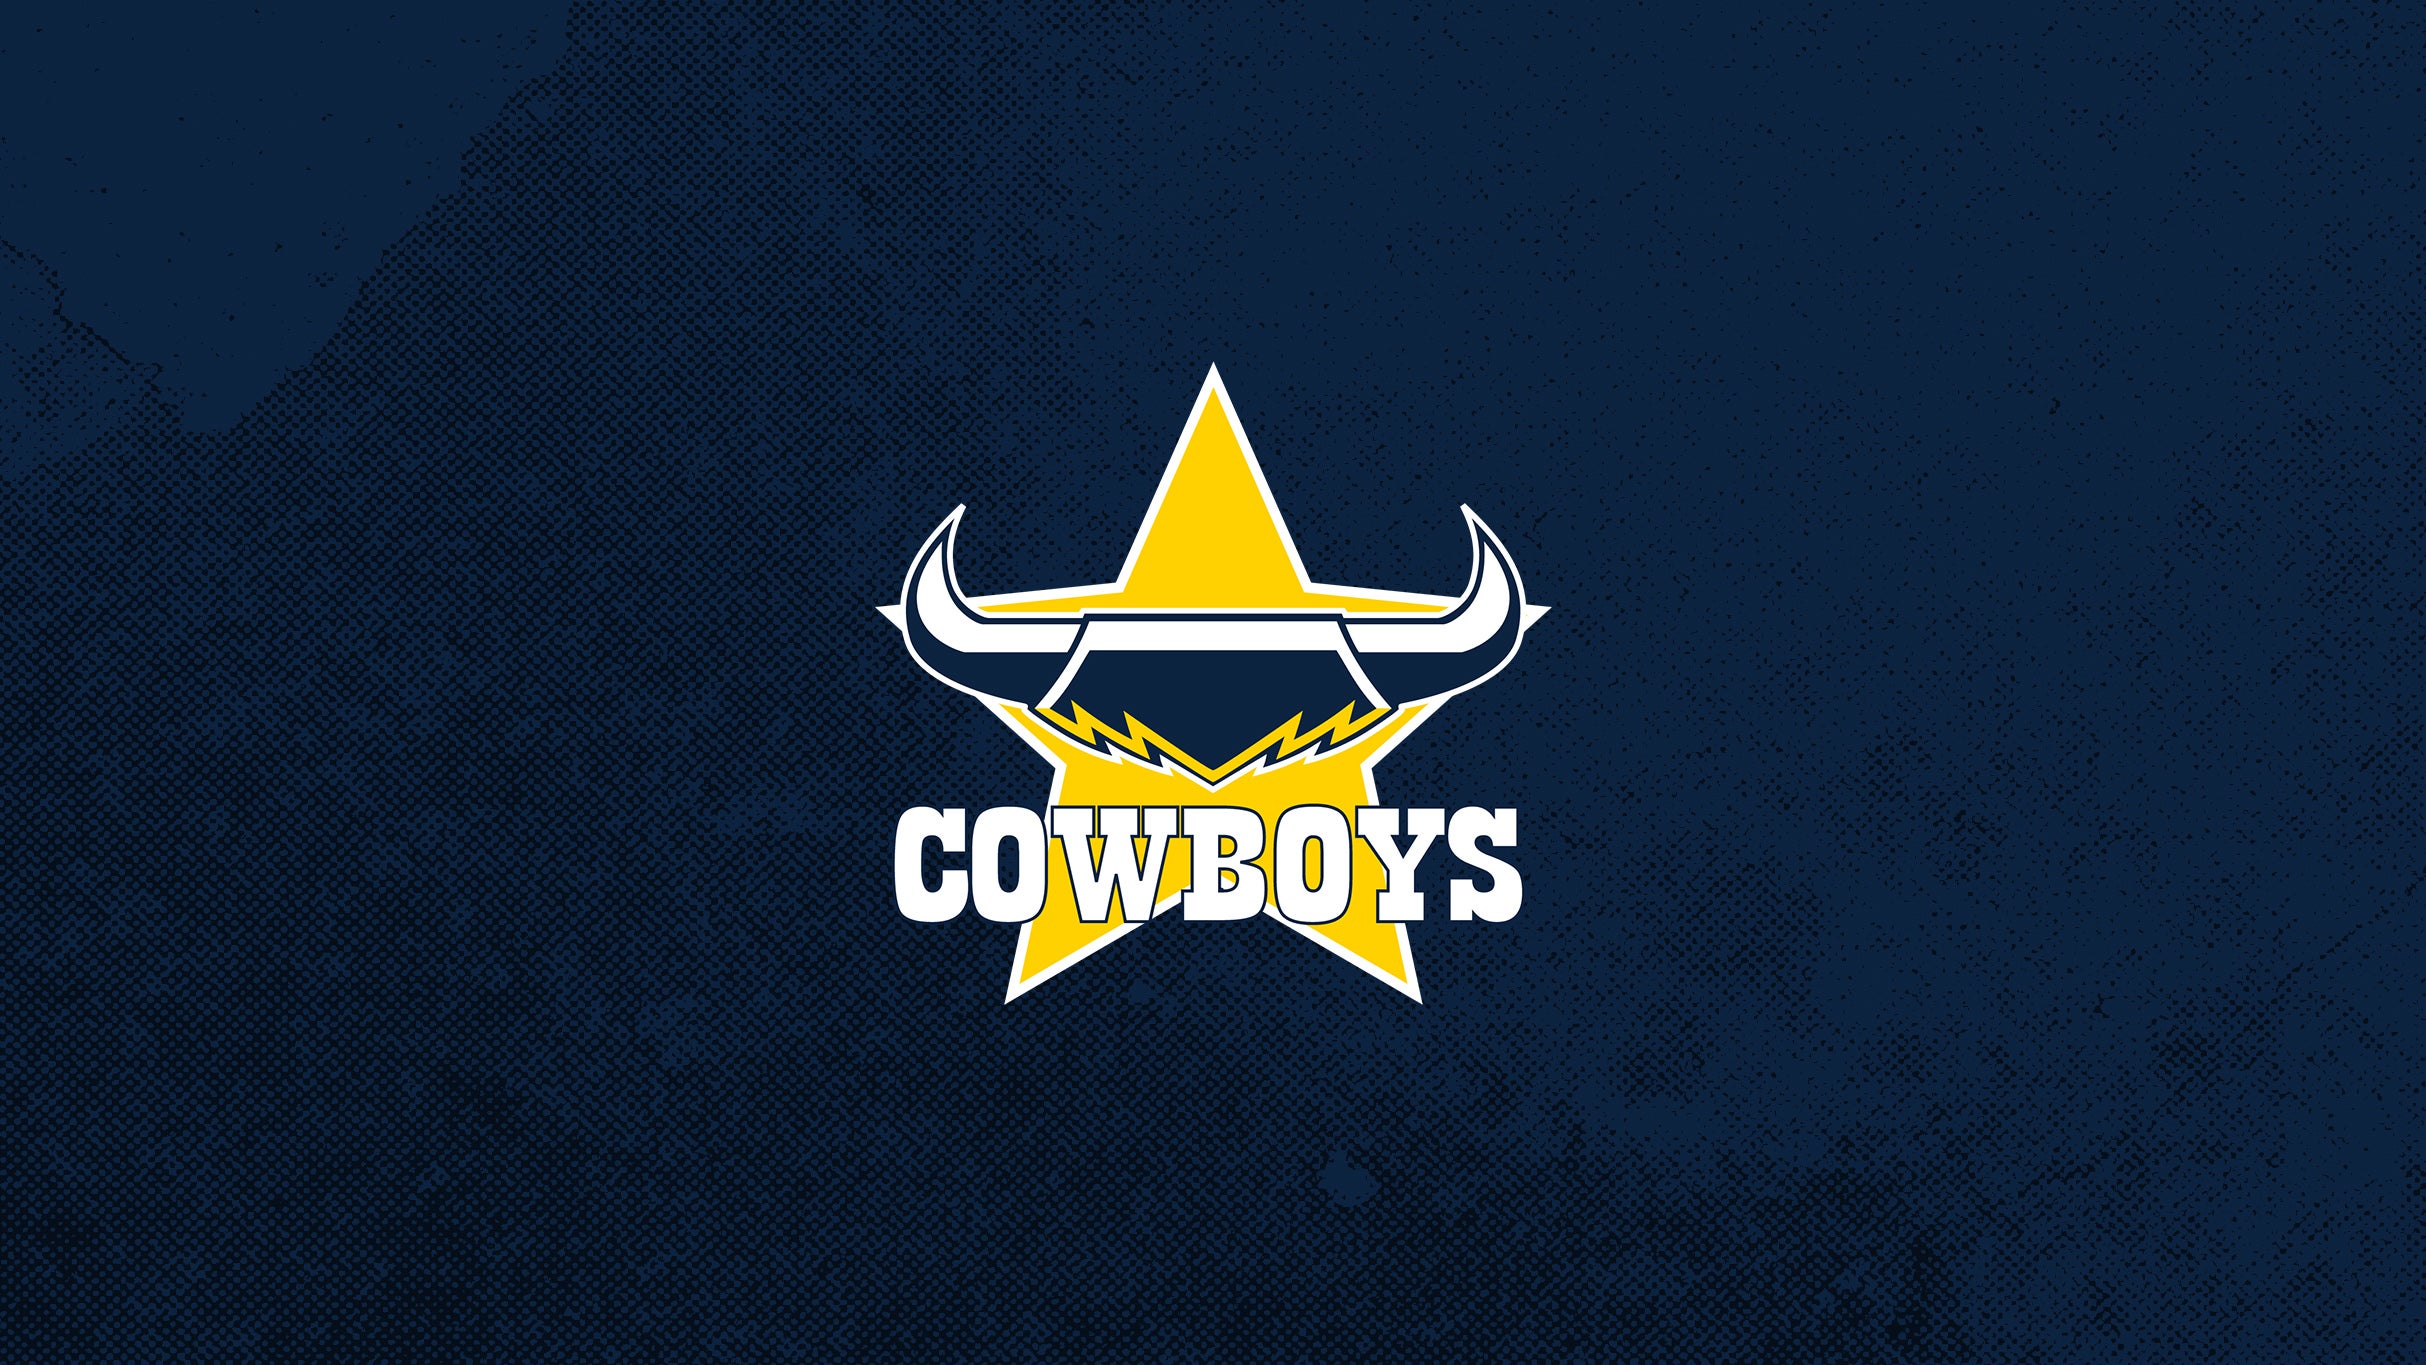 North Queensland Toyota Cowboys v Melbourne Storm (Round 14) in Townsville promo photo for Cowboys Members presale offer code